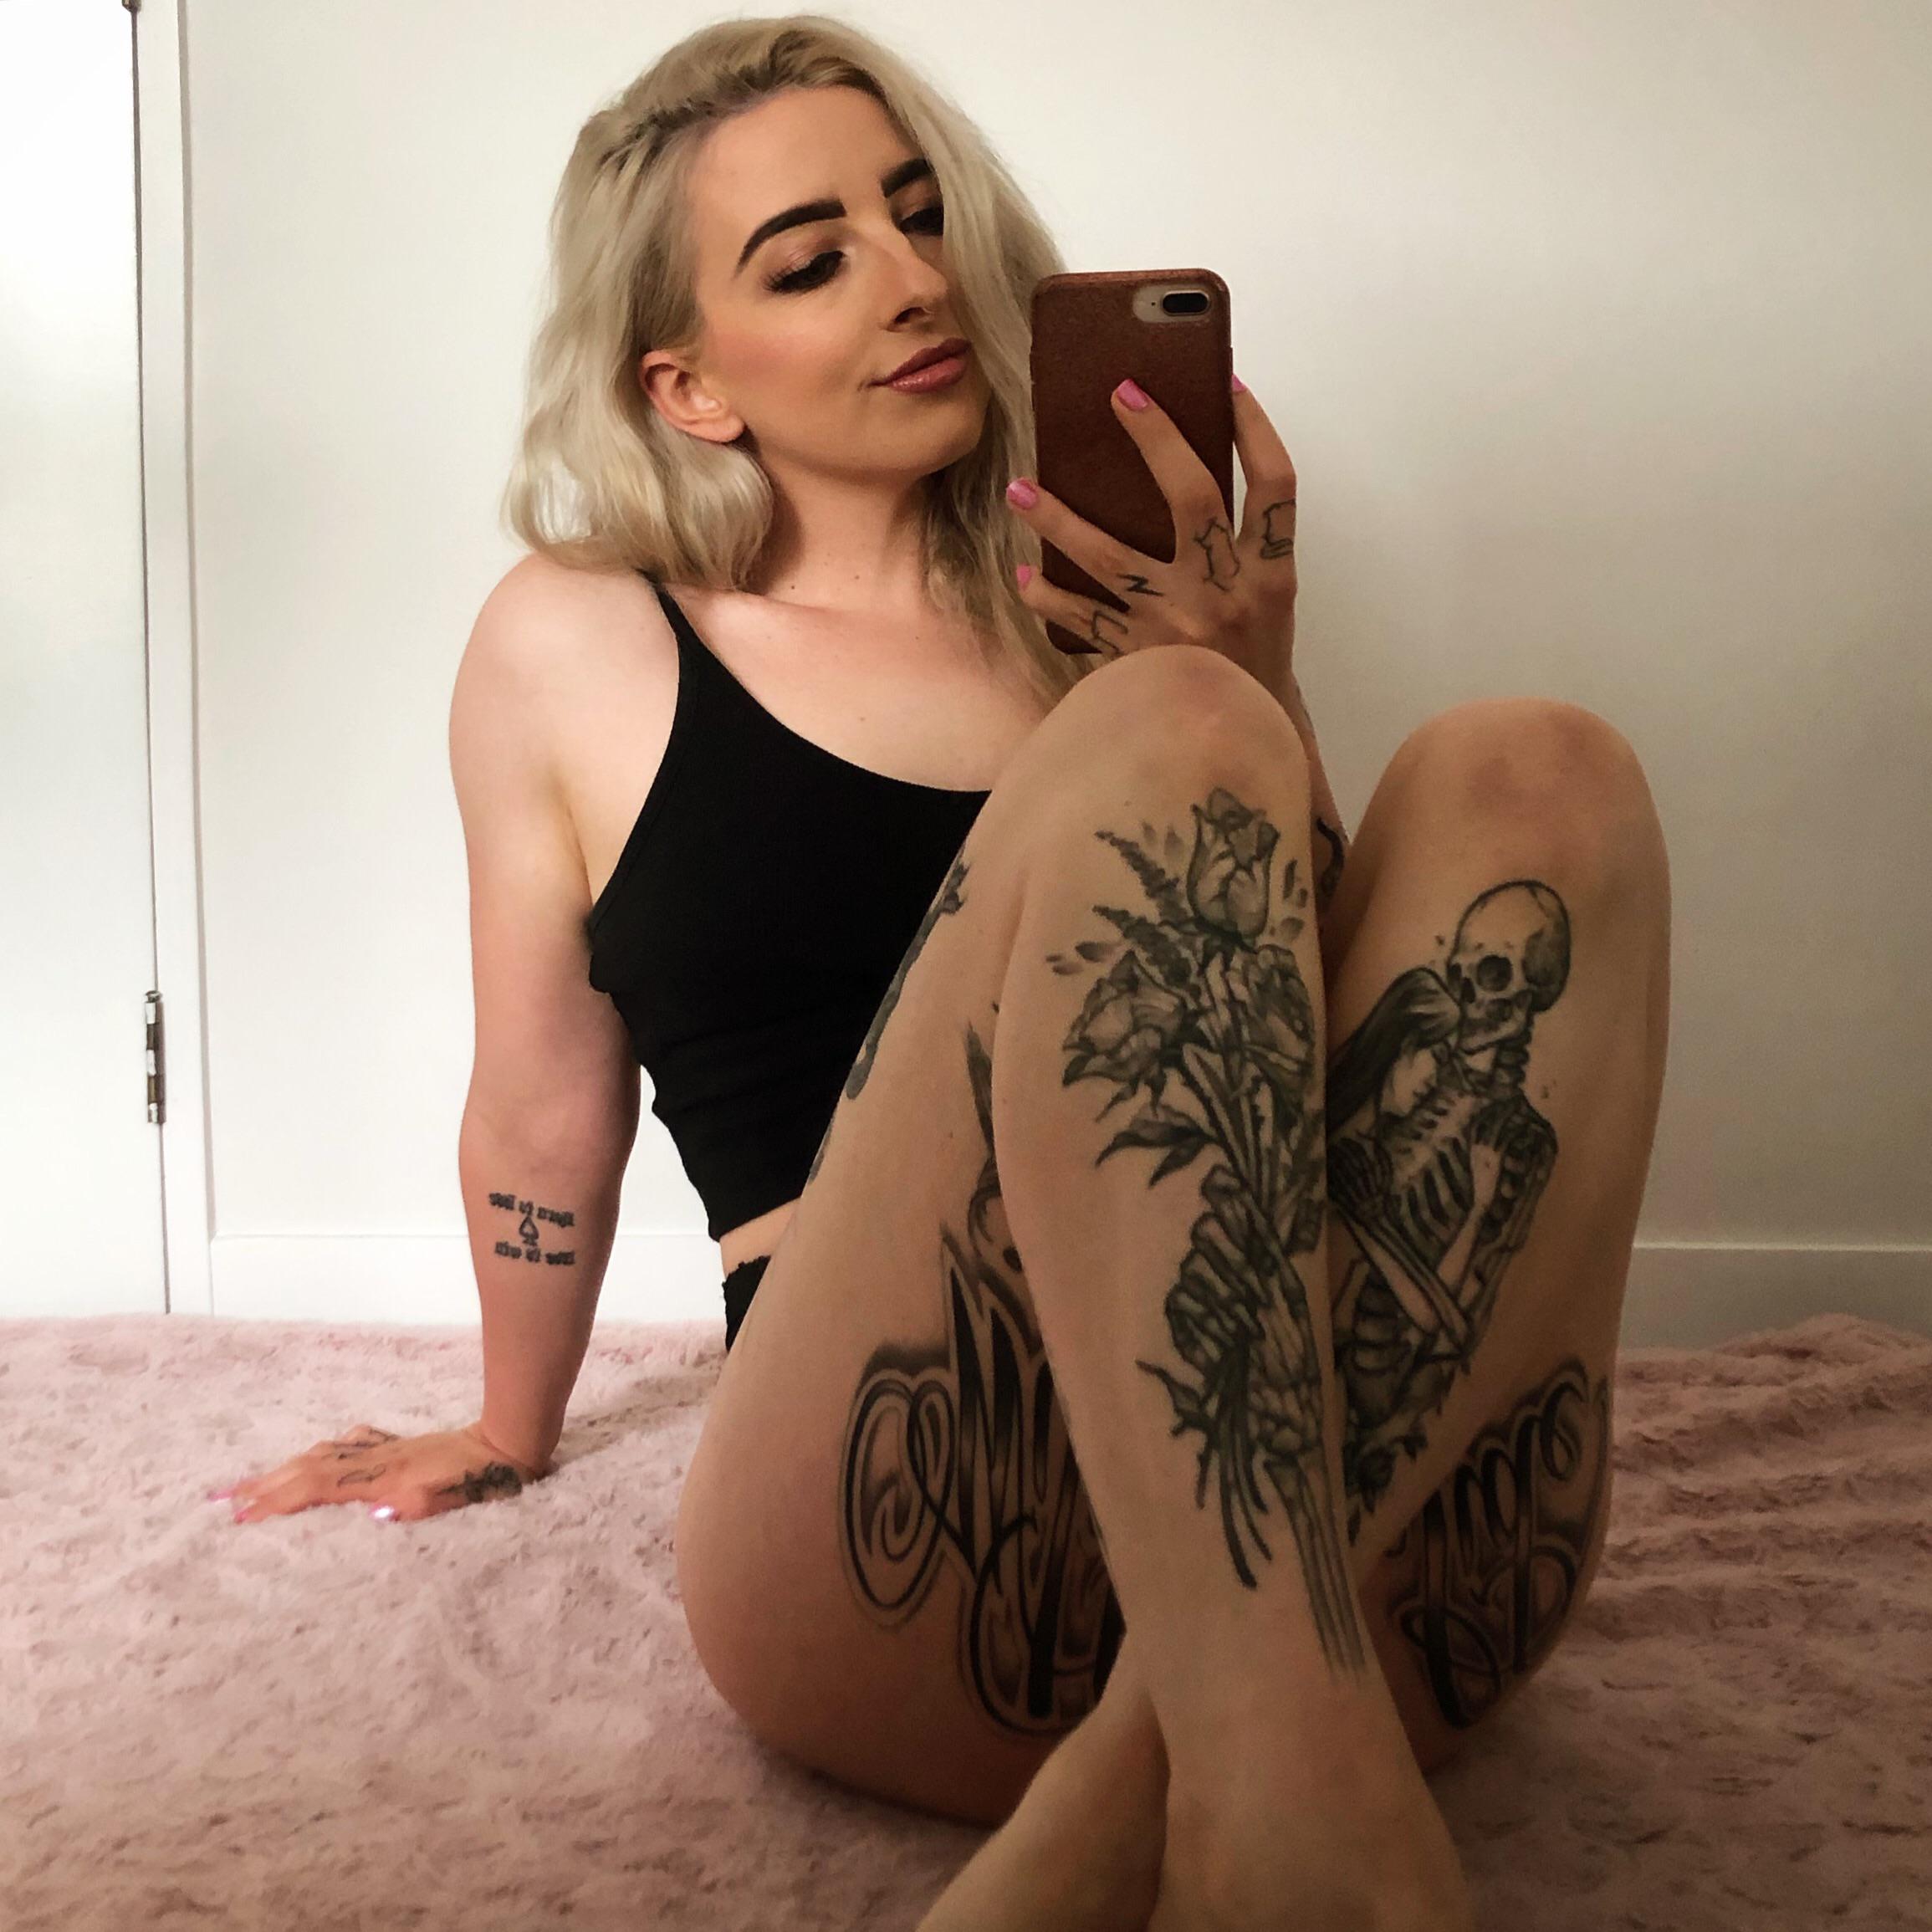 Always Room For More Tattoos ?